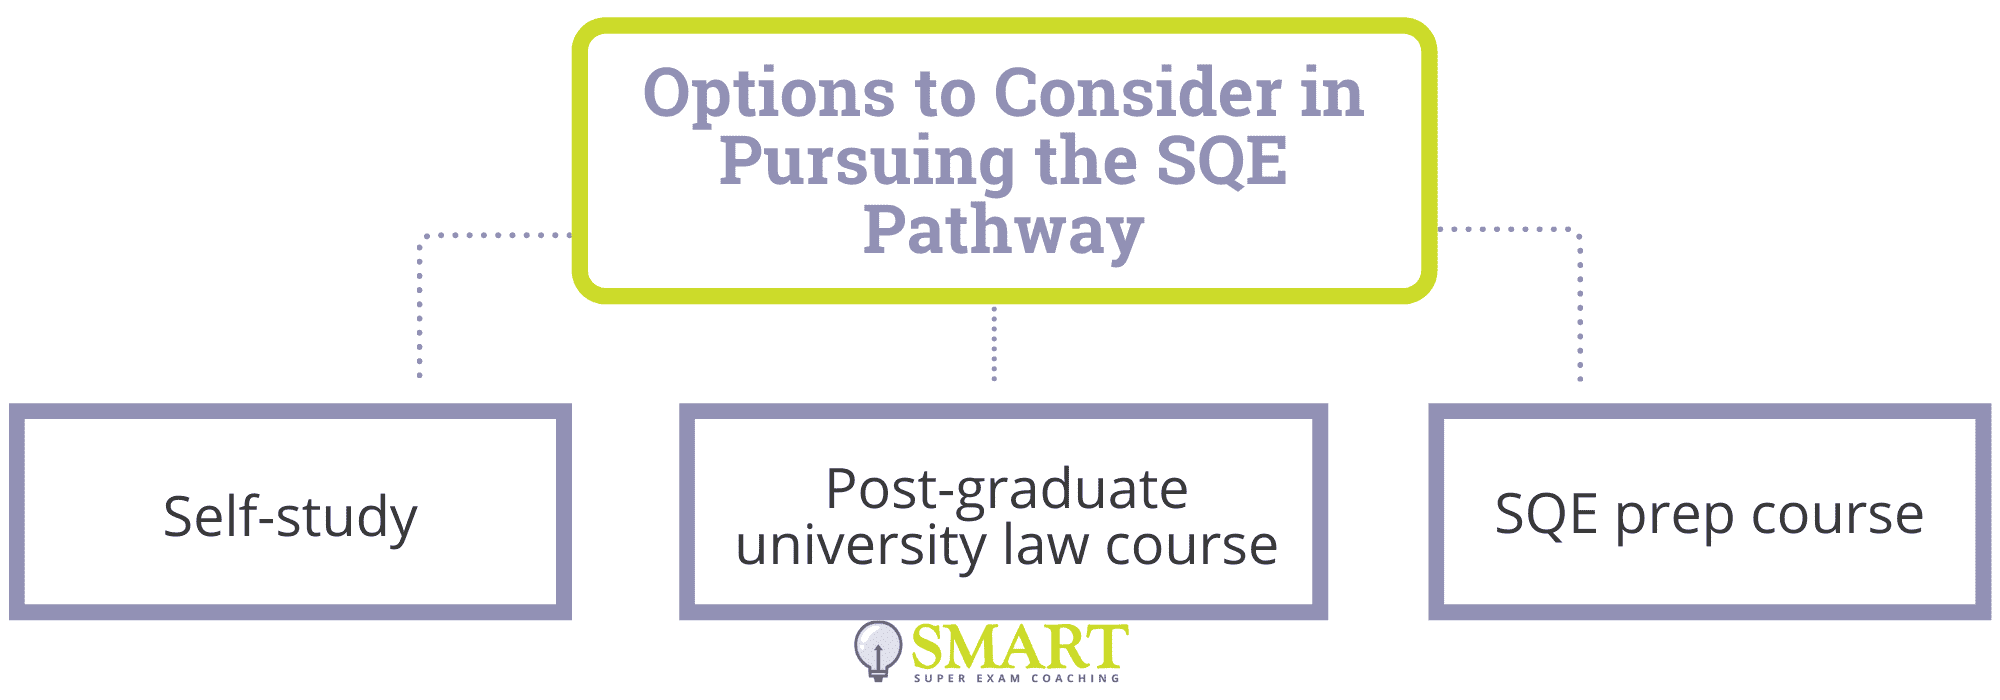 Options to Consider in Pursuing the SQE Pathway